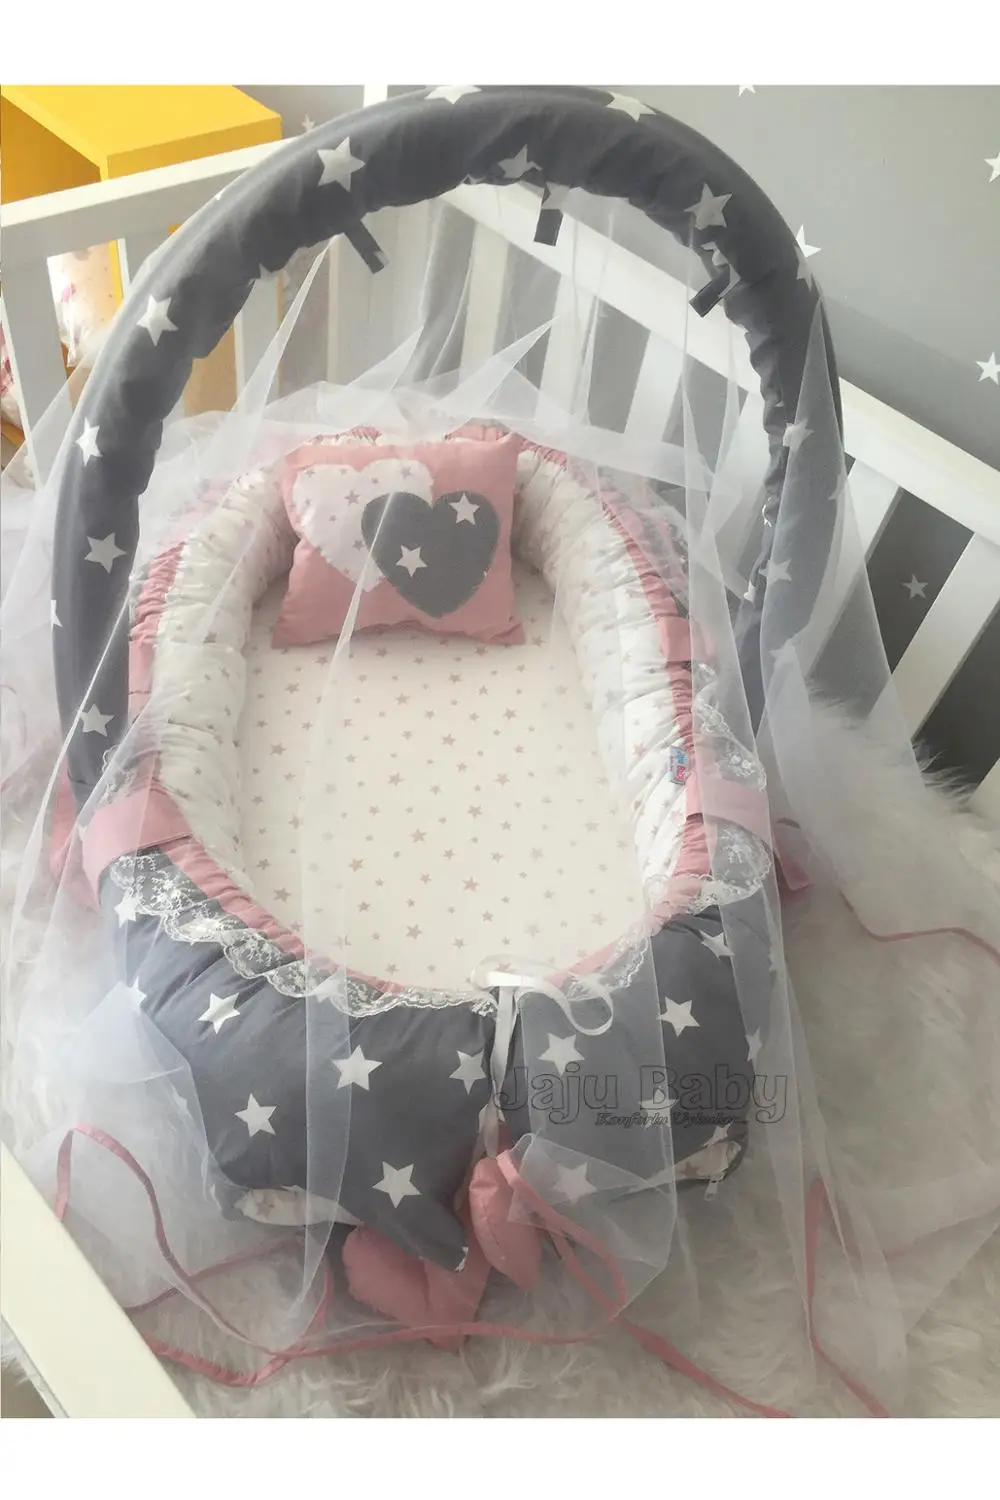 Jaju Babynest Handmade Powder and Gray Star Mosquito Net and ToyApparatus Luxury Design Babynest, Mother Side Portable Baby Bed